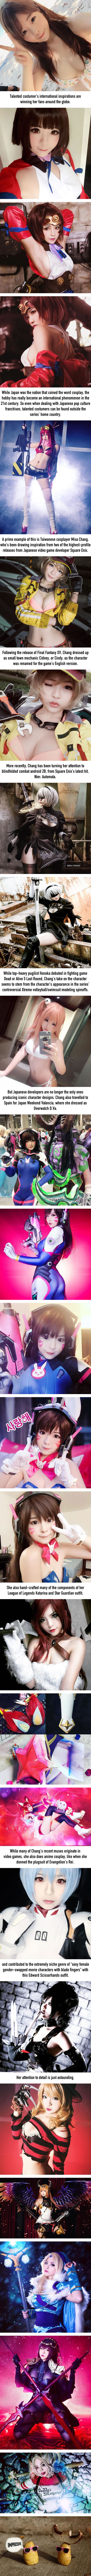 Taiwanese cosplayer charms Internet with incredible cosplay